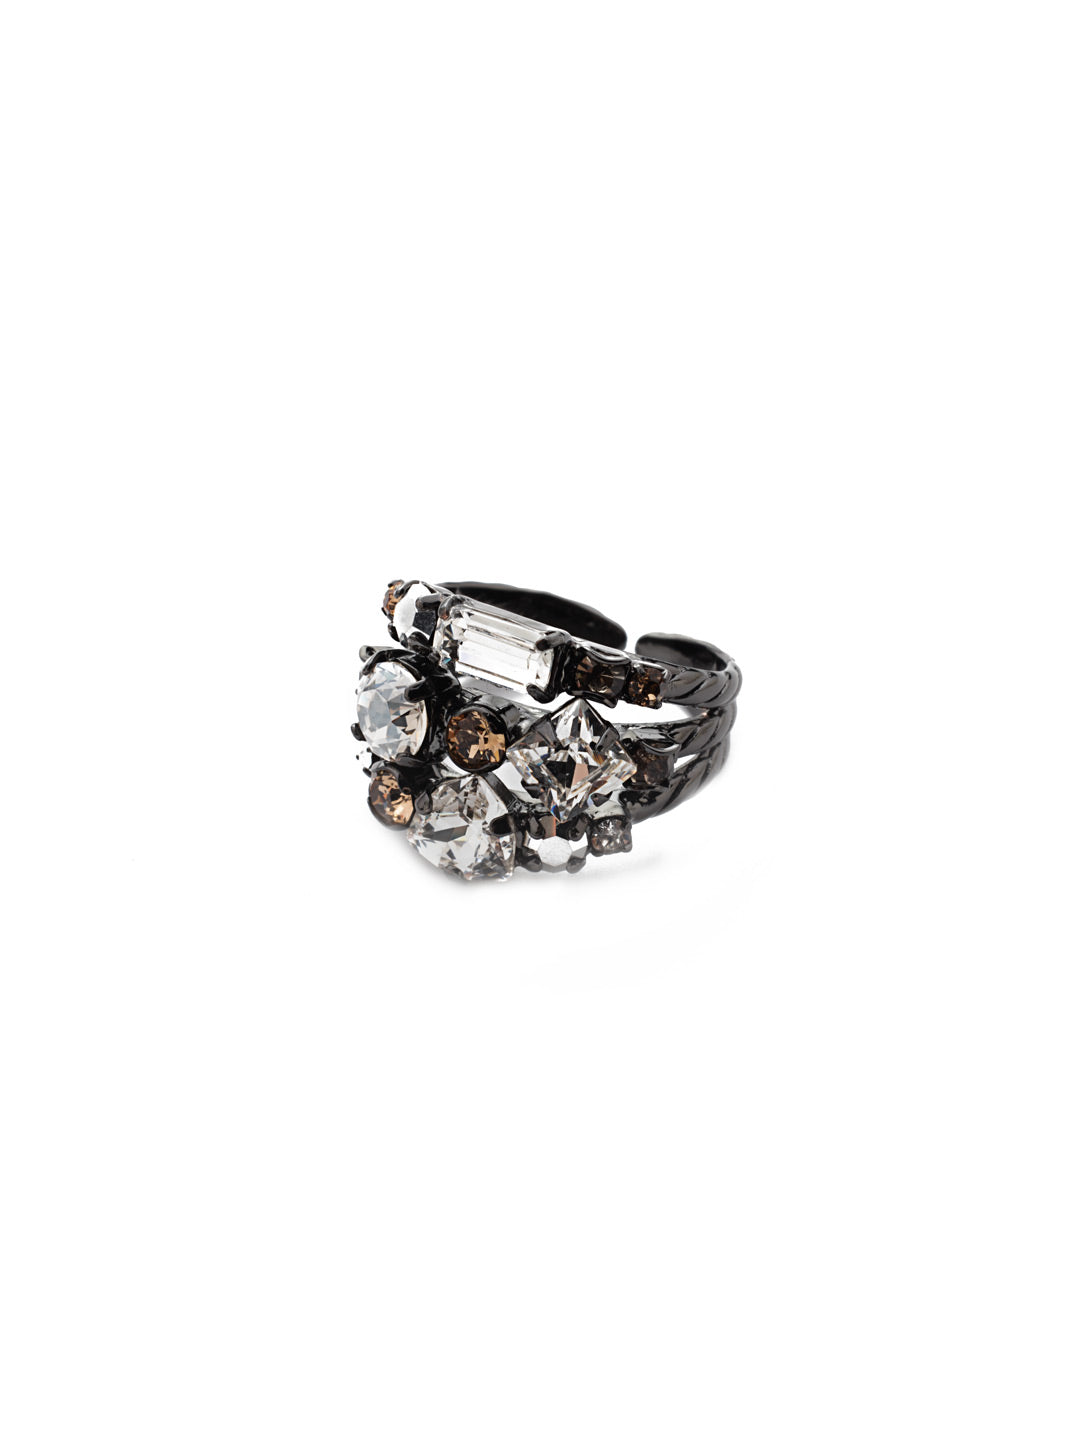 Sedge Stacked Ring - RDX1GMGNS - This adjustable ring features three layers of crystals to create the illusion of three stackable rings. From Sorrelli's Golden Shadow collection in our Gun Metal finish.